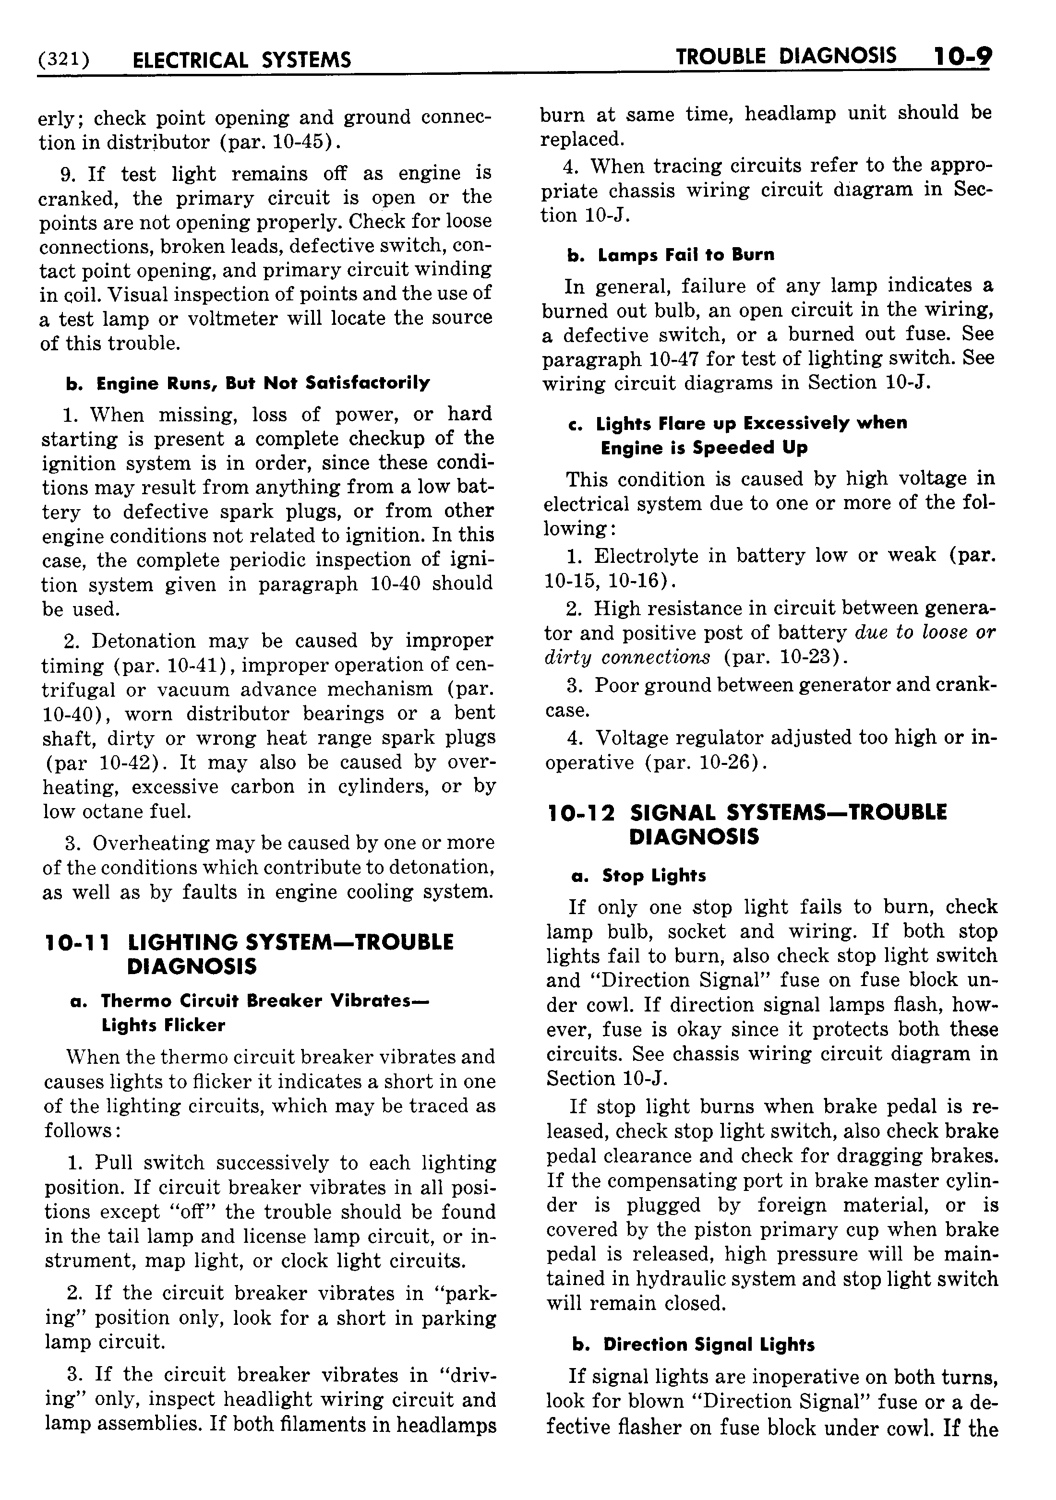 n_11 1954 Buick Shop Manual - Electrical Systems-009-009.jpg